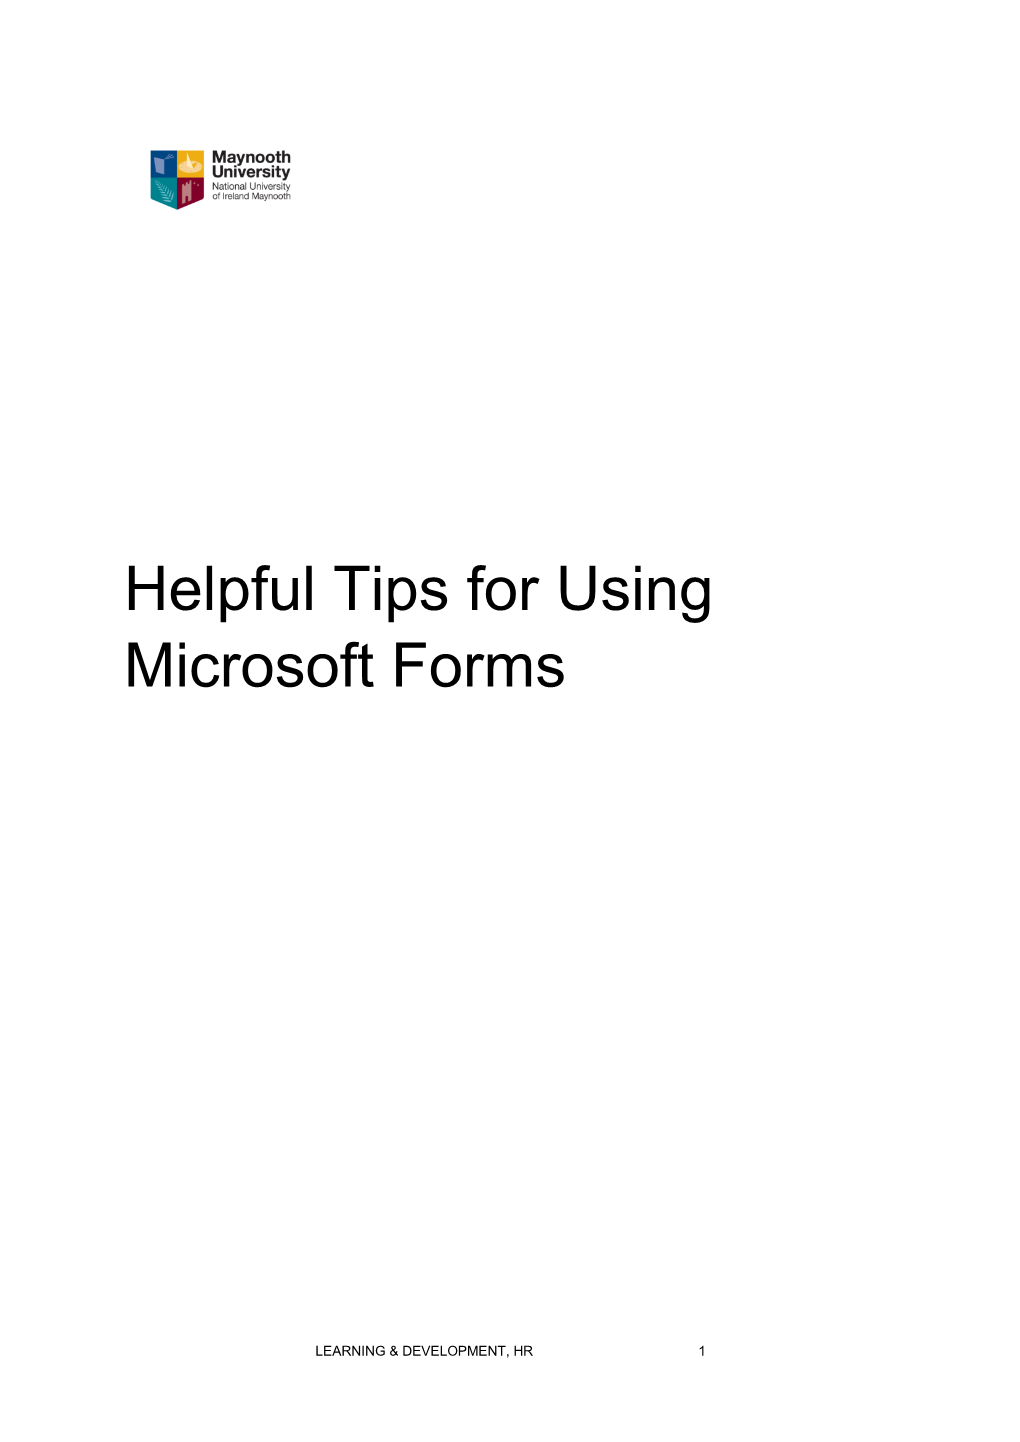 Helpful Tips for Using Microsoft Forms